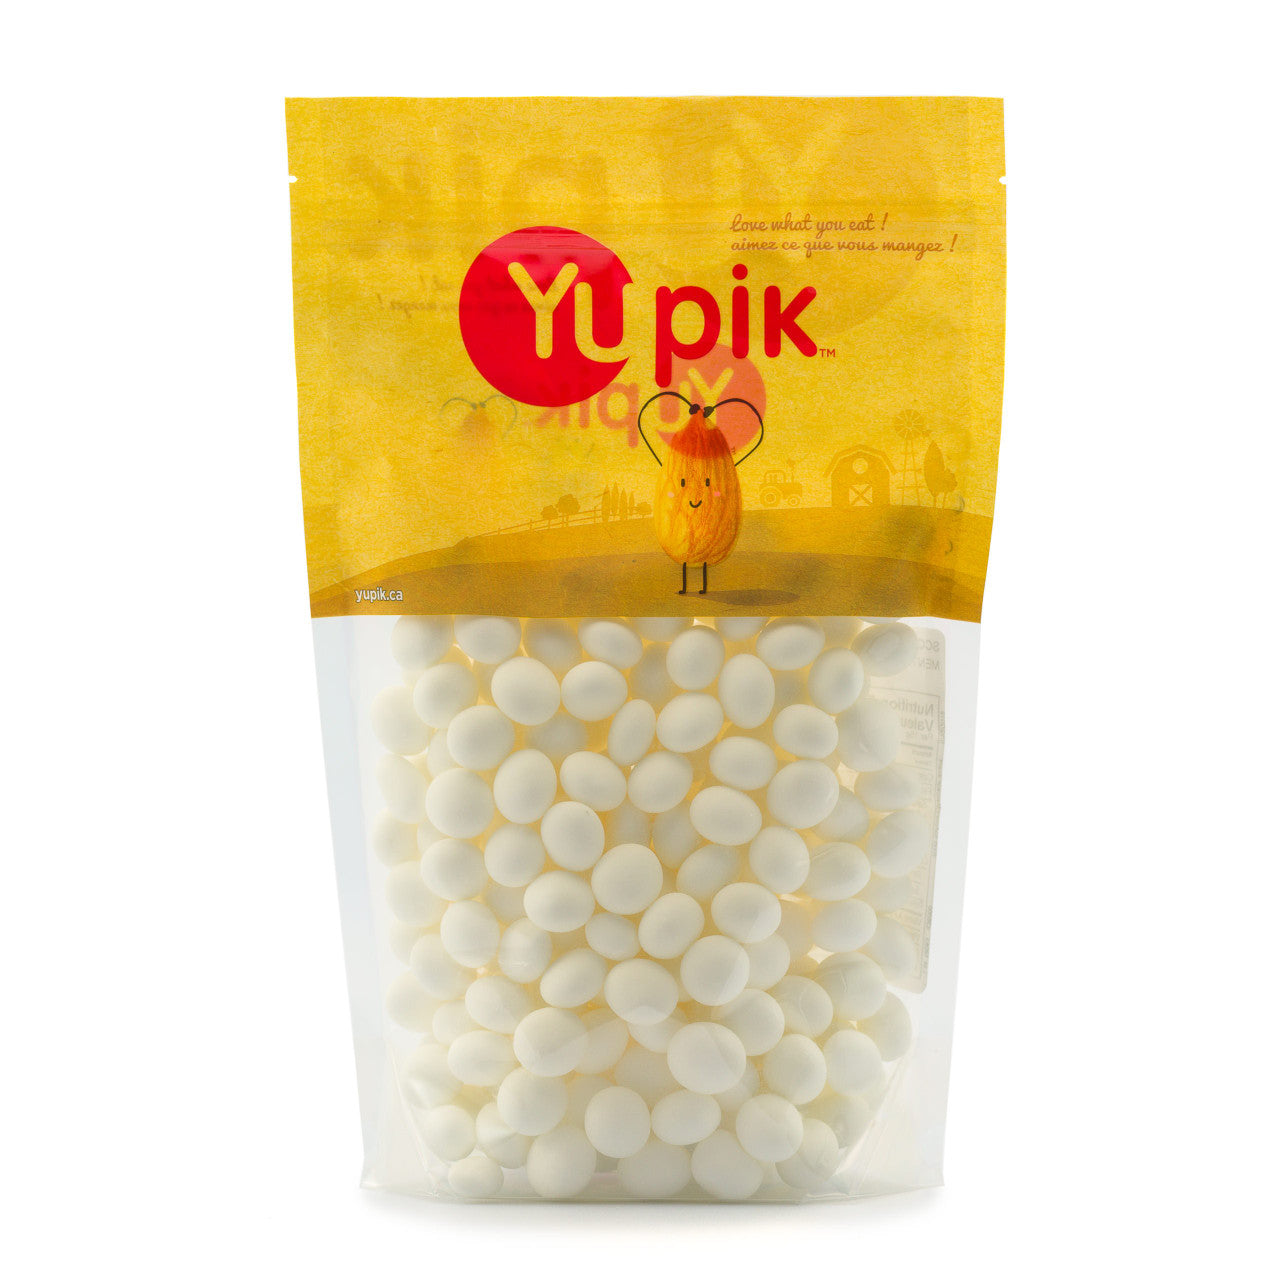 Yupik Scotch Mints, 1Kg/2.2lbs Bag, {Imported from Canada}